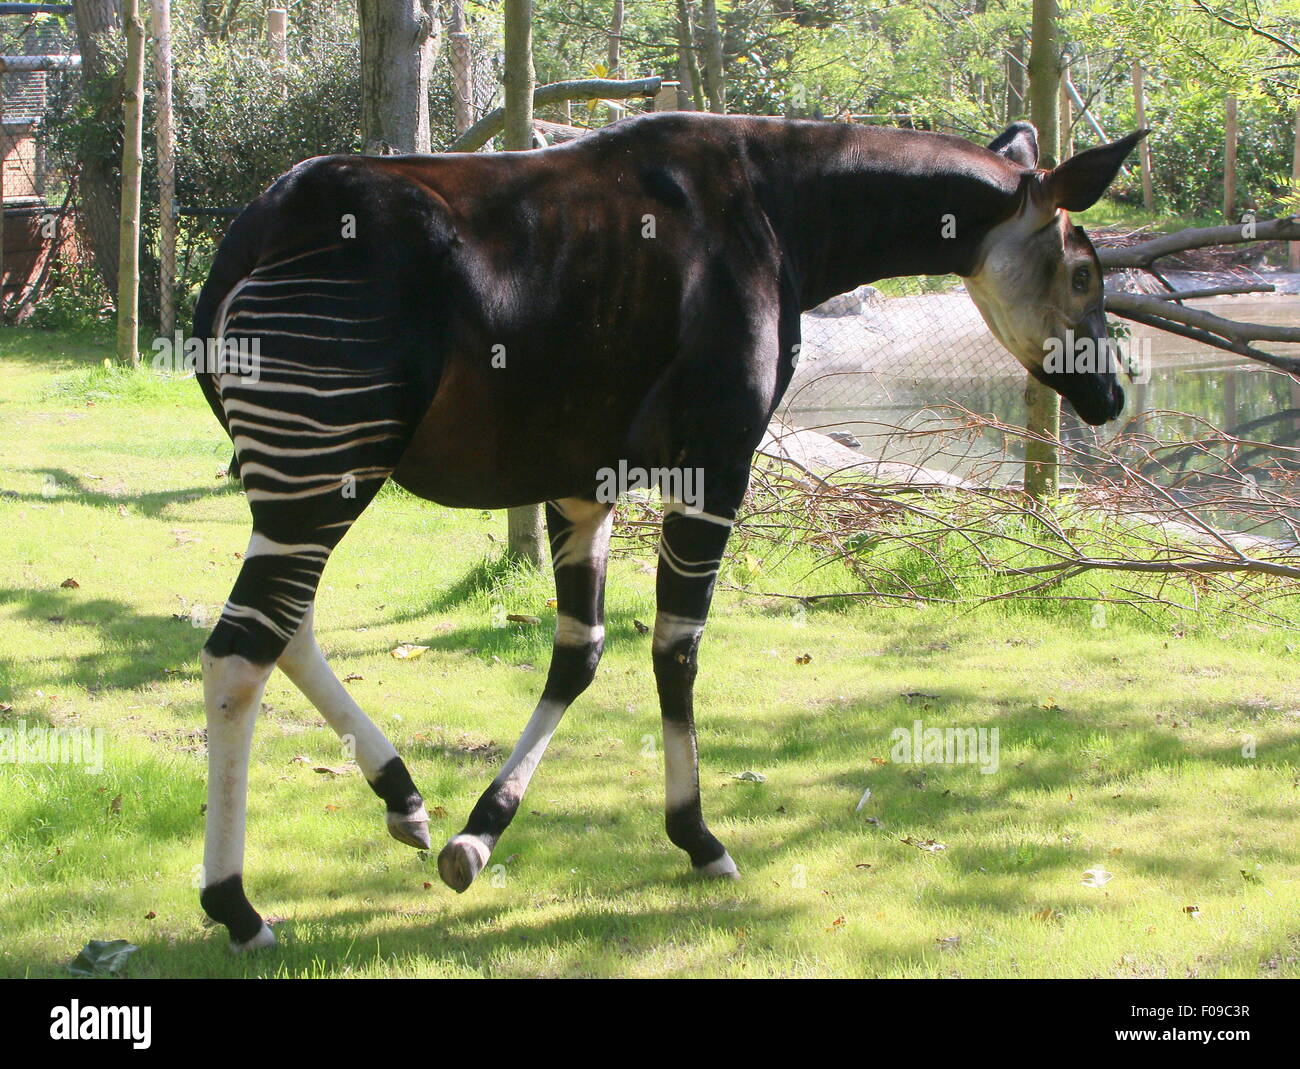 Central African Okapi (Okapia johnstoni) at the enclosure in Rotterdam Blijdorp Zoo, The Netherlands -fences & buildings visible Stock Photo